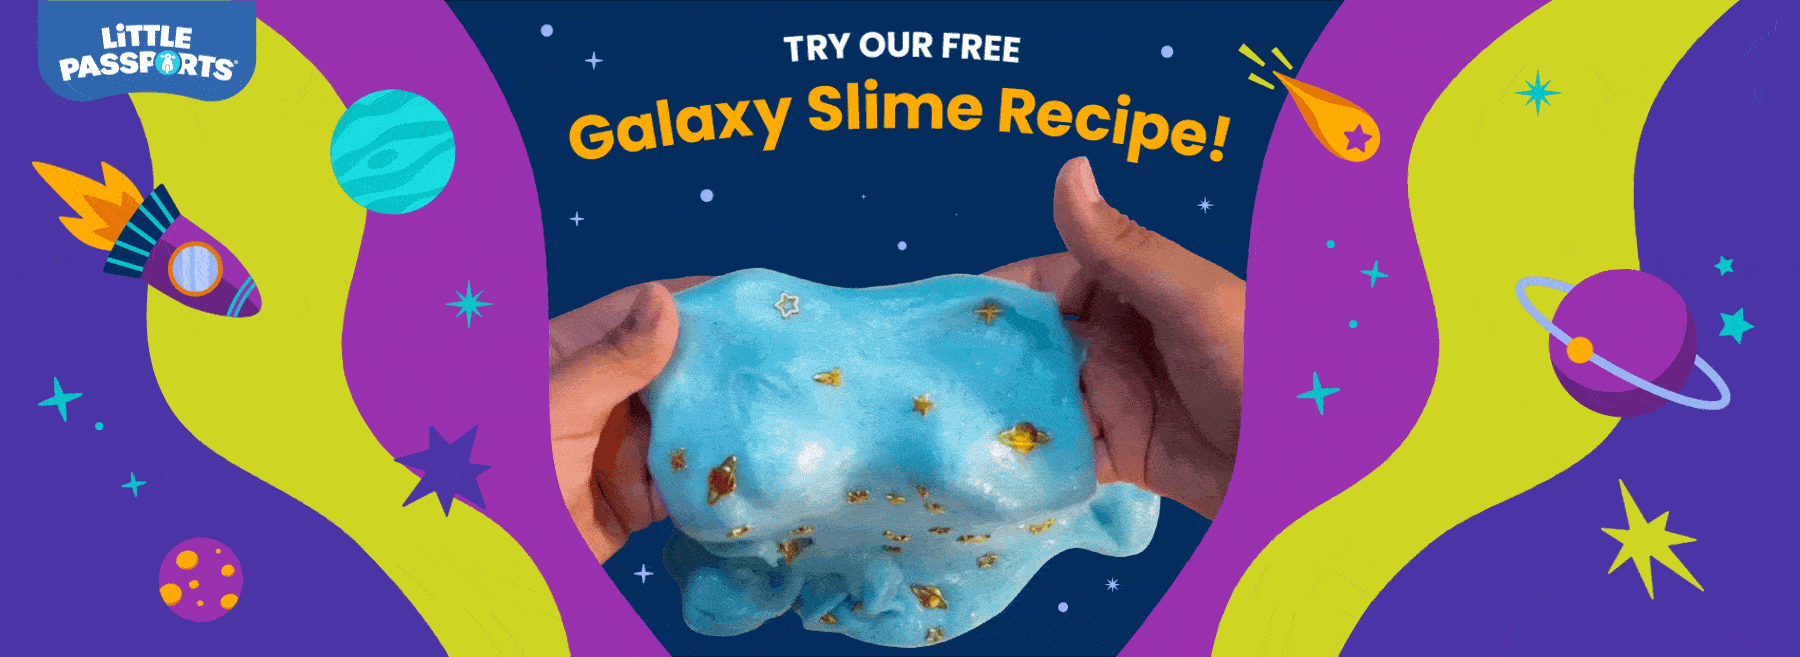 Try our free galaxy slime recipe